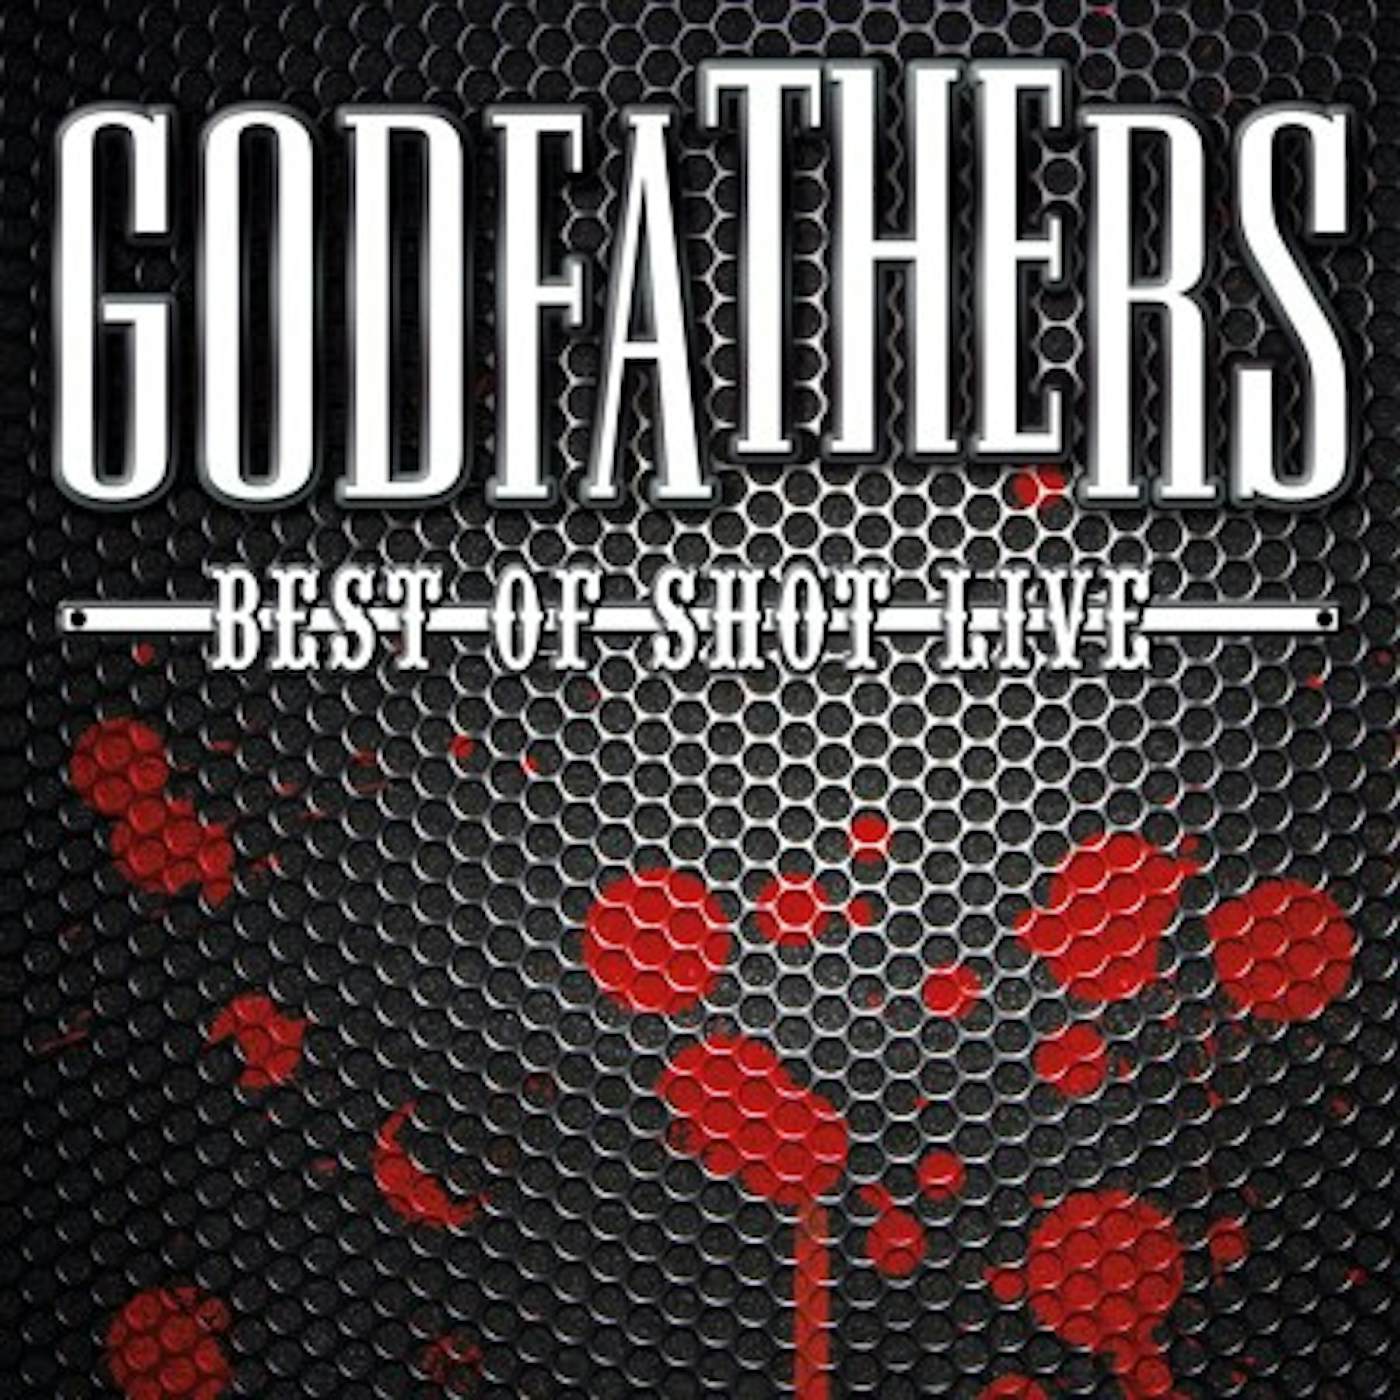 The Godfathers Best Of Shot Live Vinyl Record